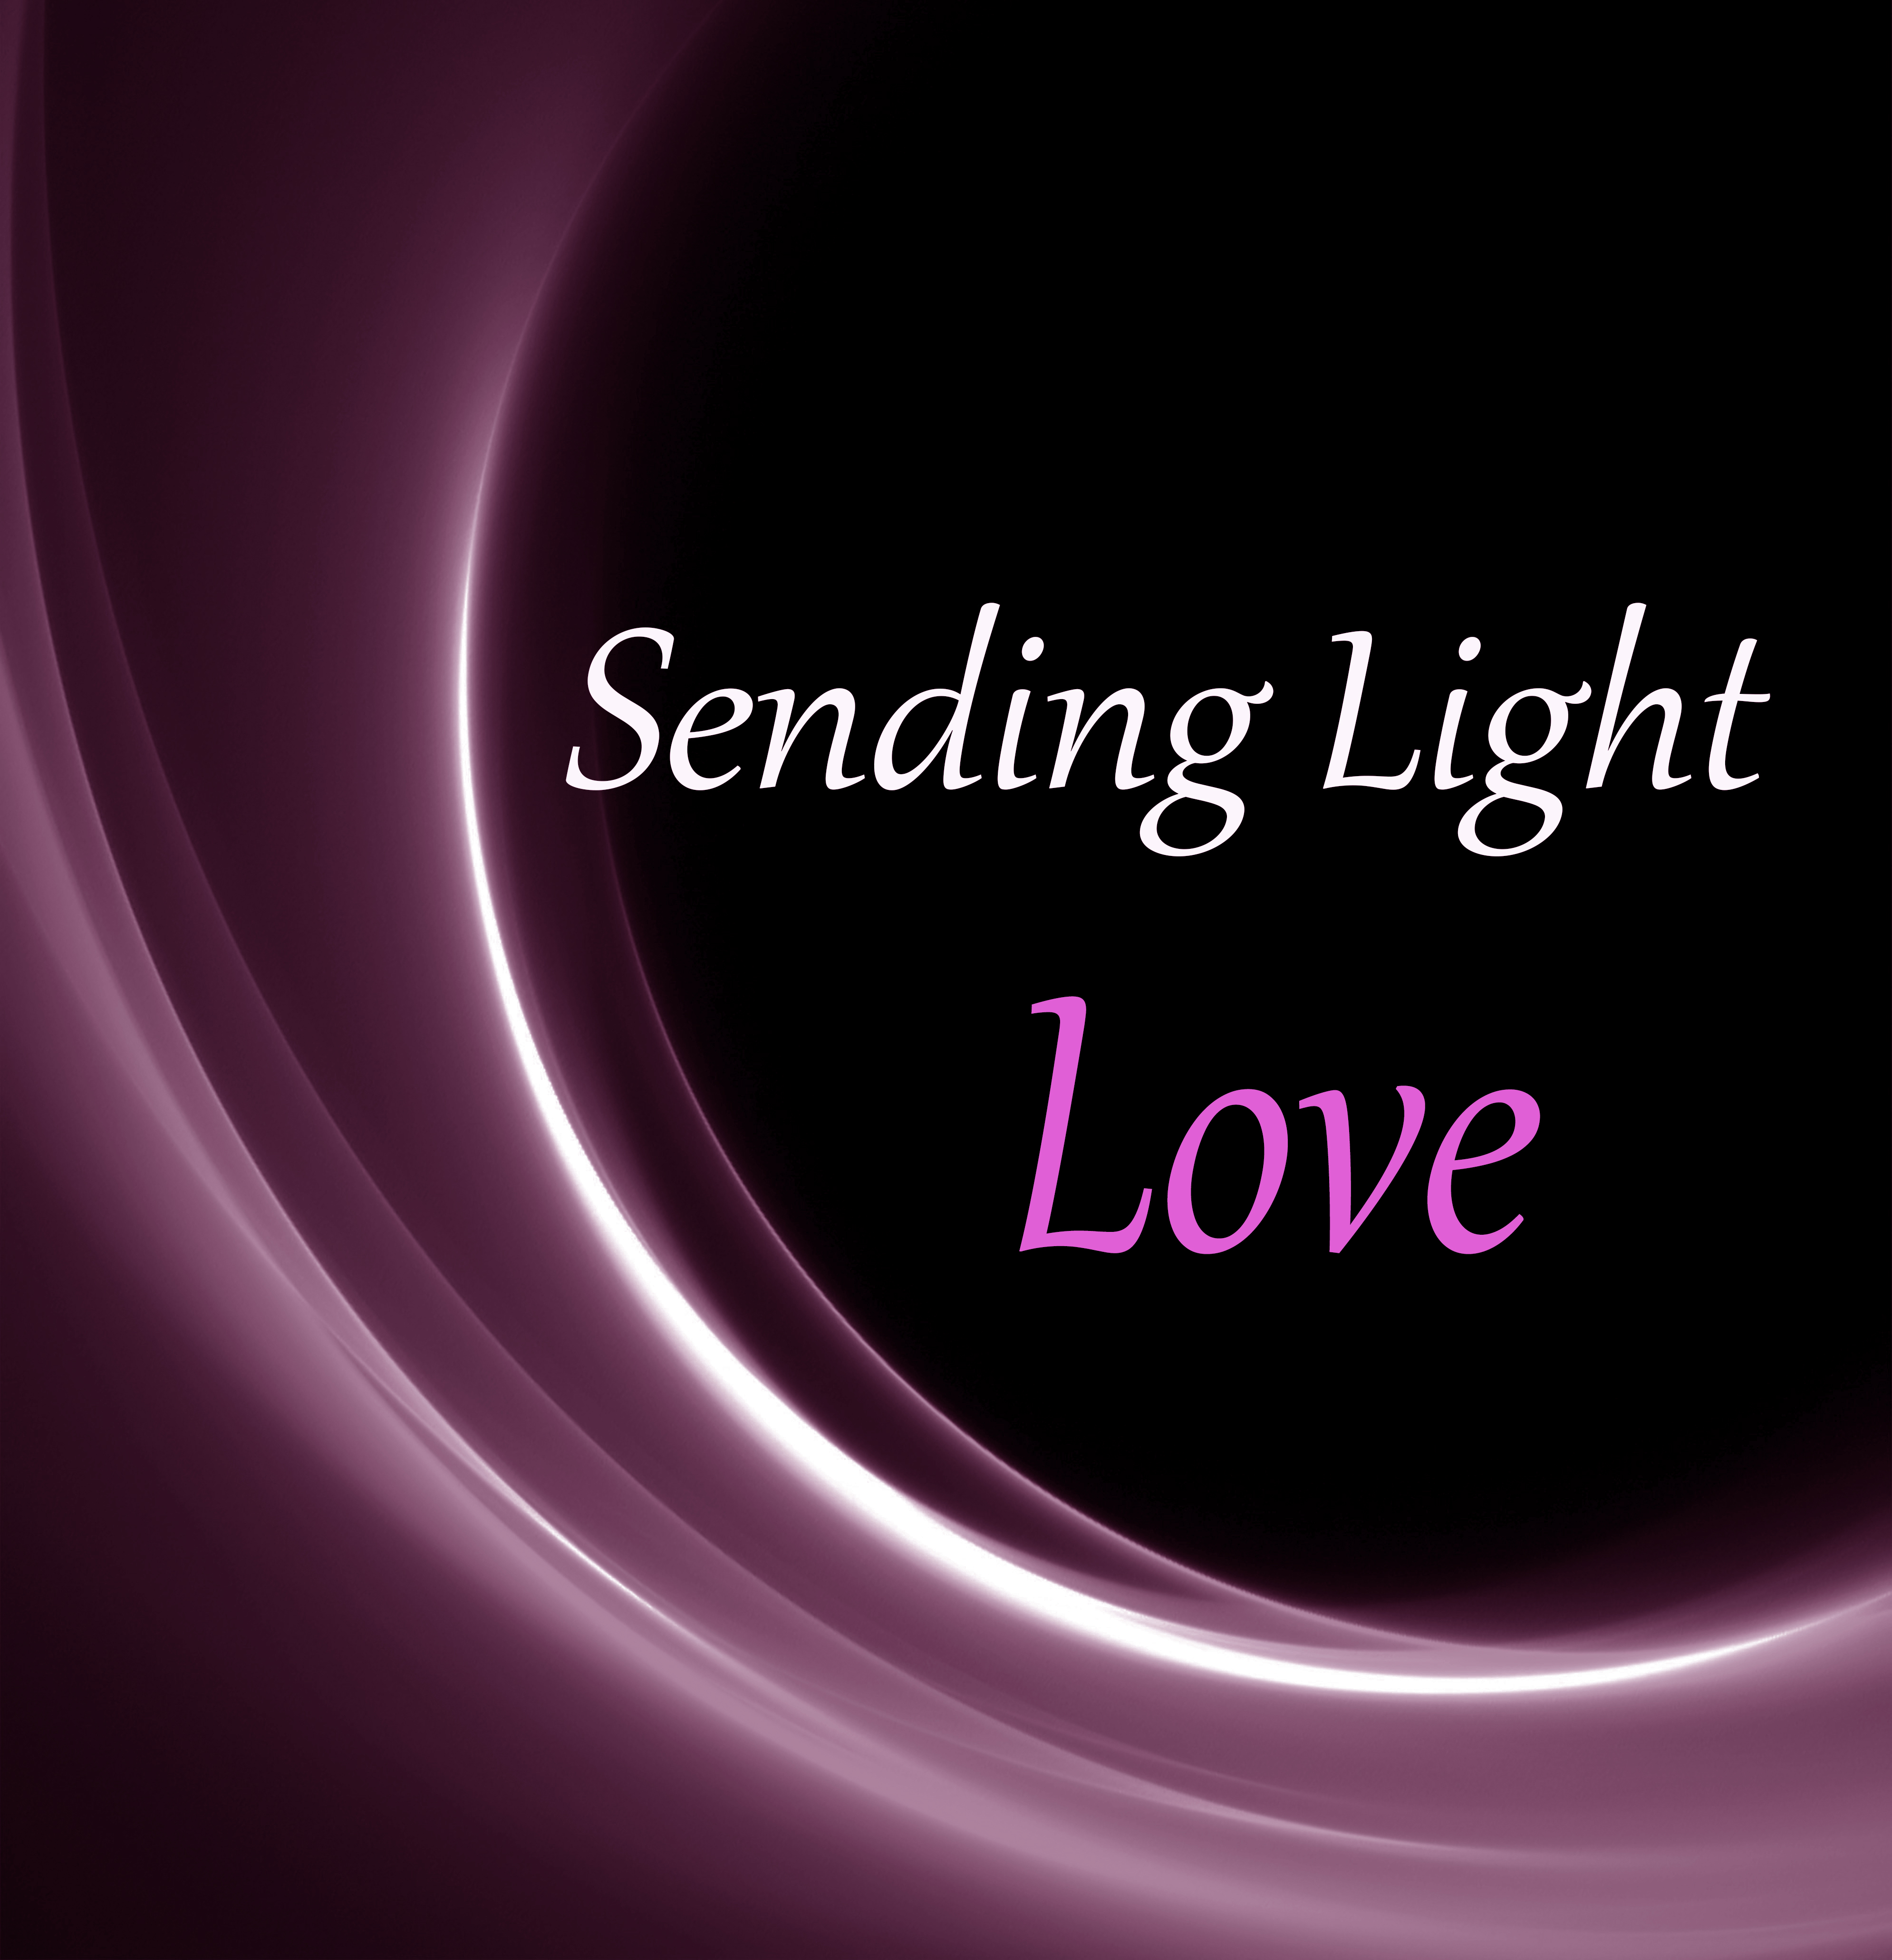 Sending Light: Reiki App for Love This Reiki app relates to the Heart chakra, supporting your opening to greater Love in your life and releasing that which is not Love.